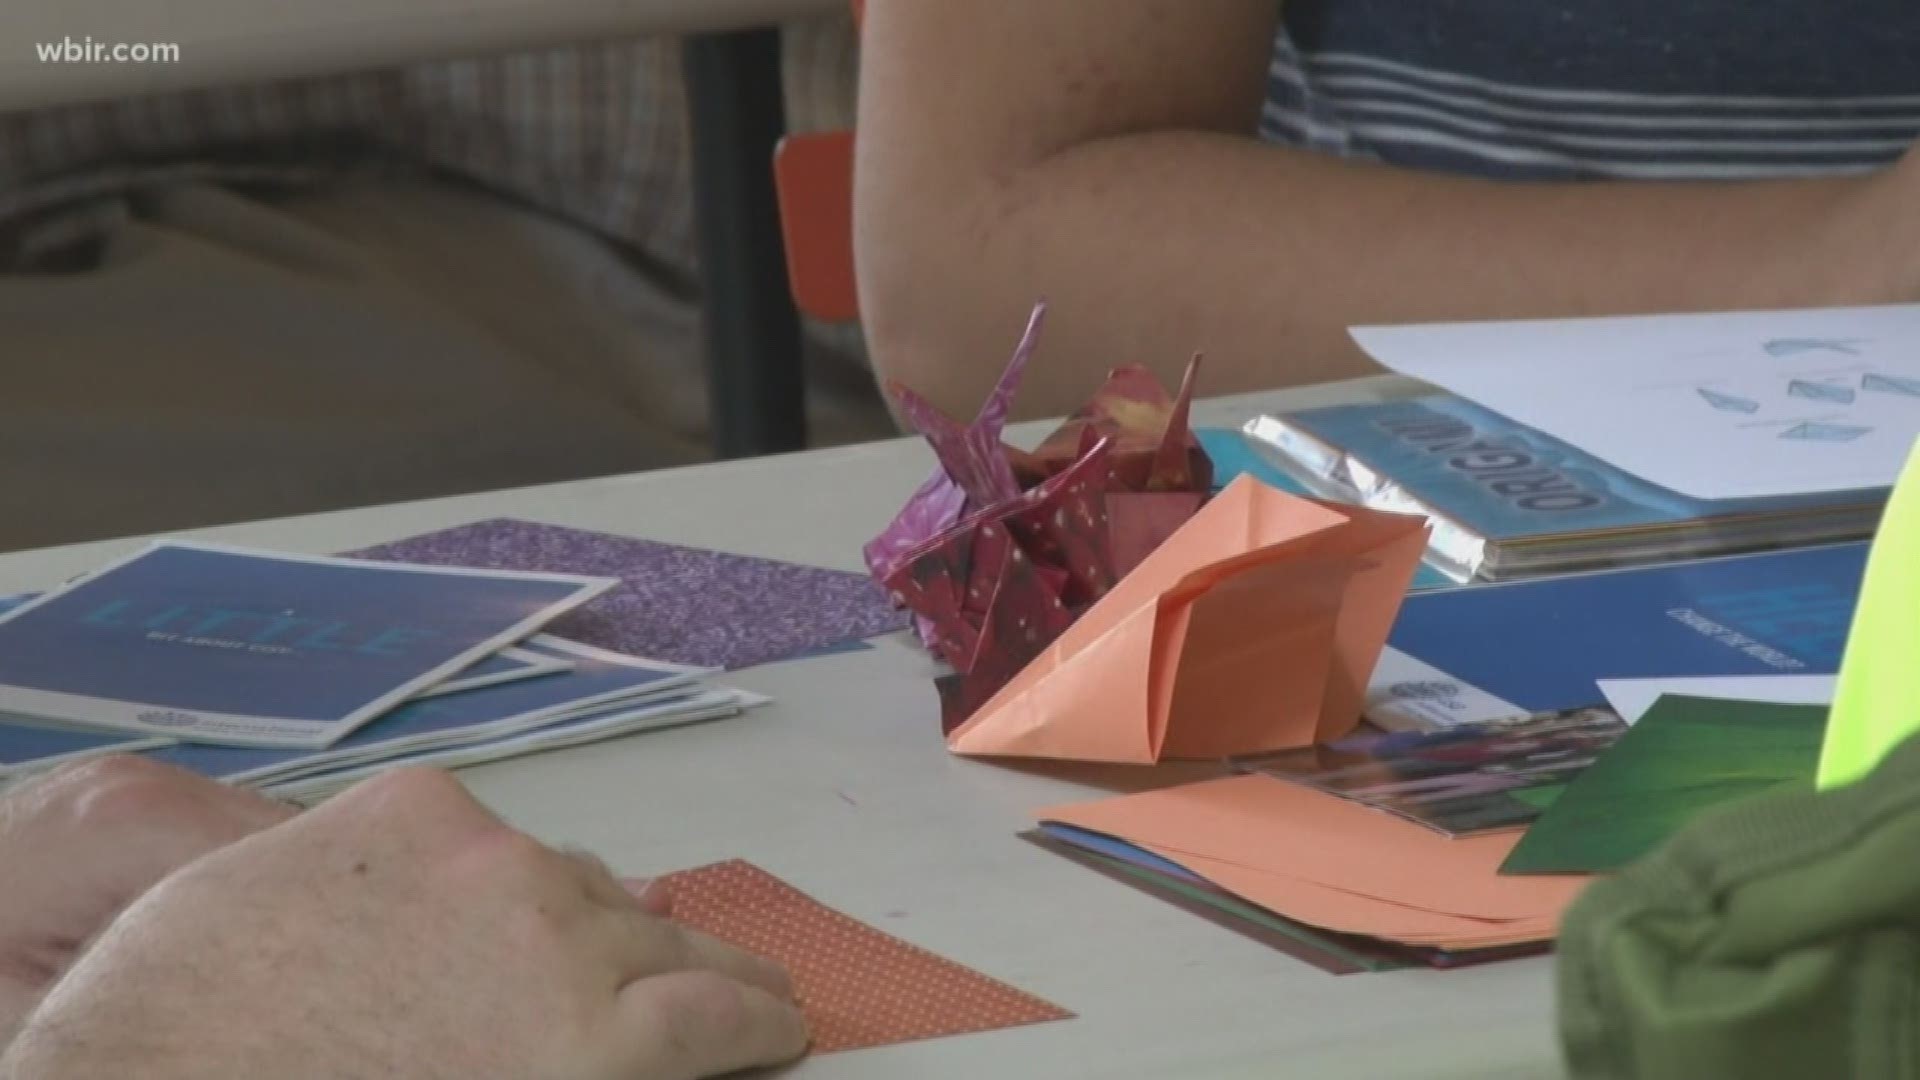 The Oak Ridge Environmental Peace Alliance is celebrating by attempting to fold one thousand origami cranes.